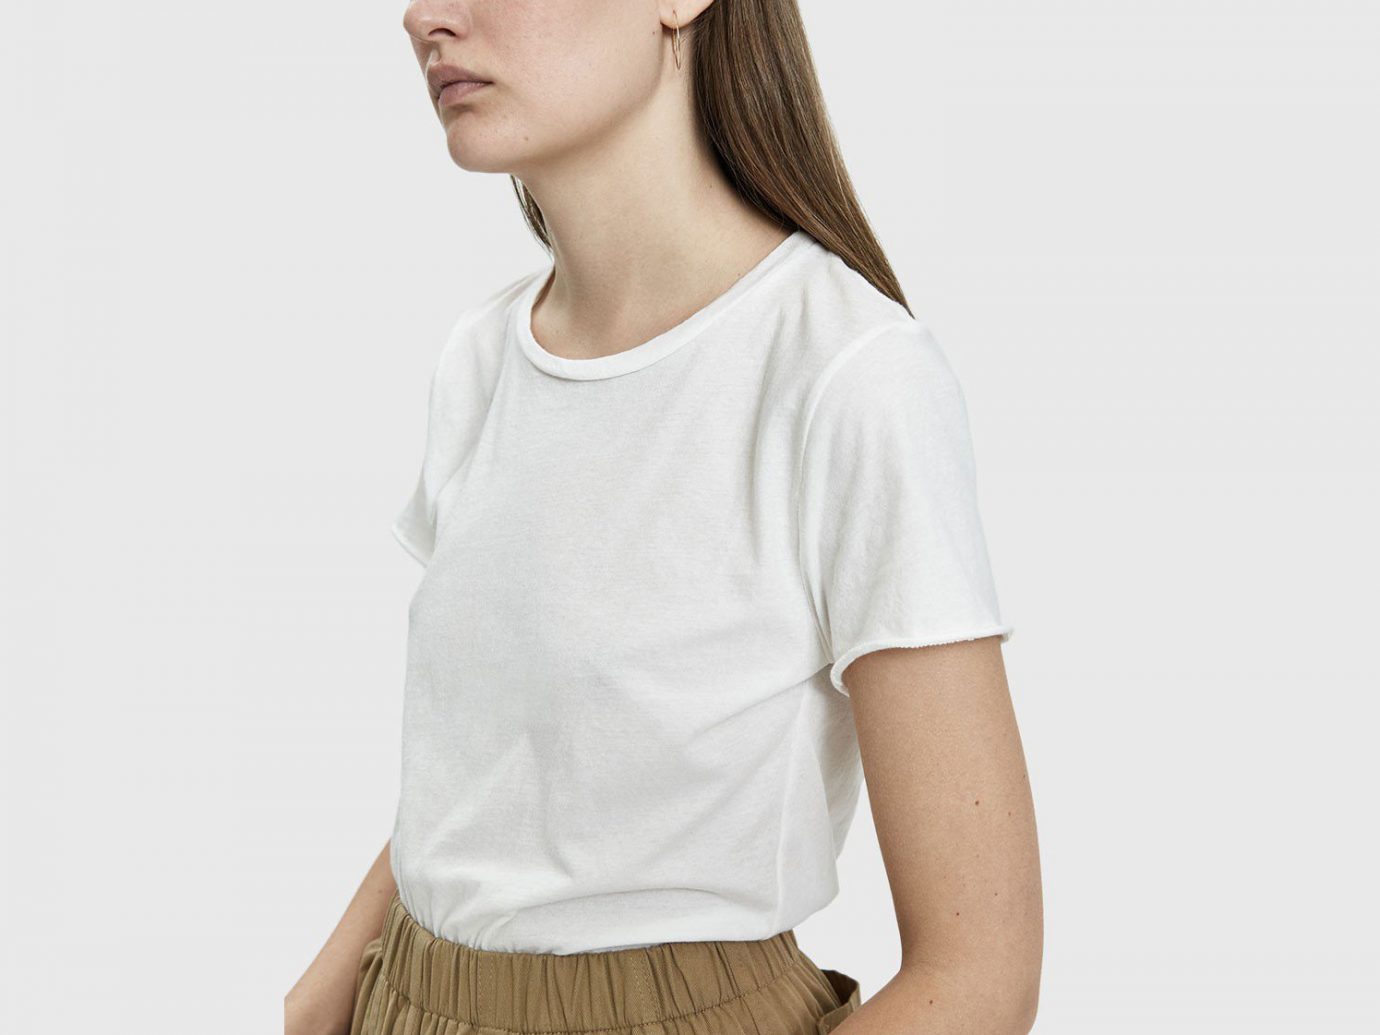 Which We Want Beverly Worn Tee in Vintage White